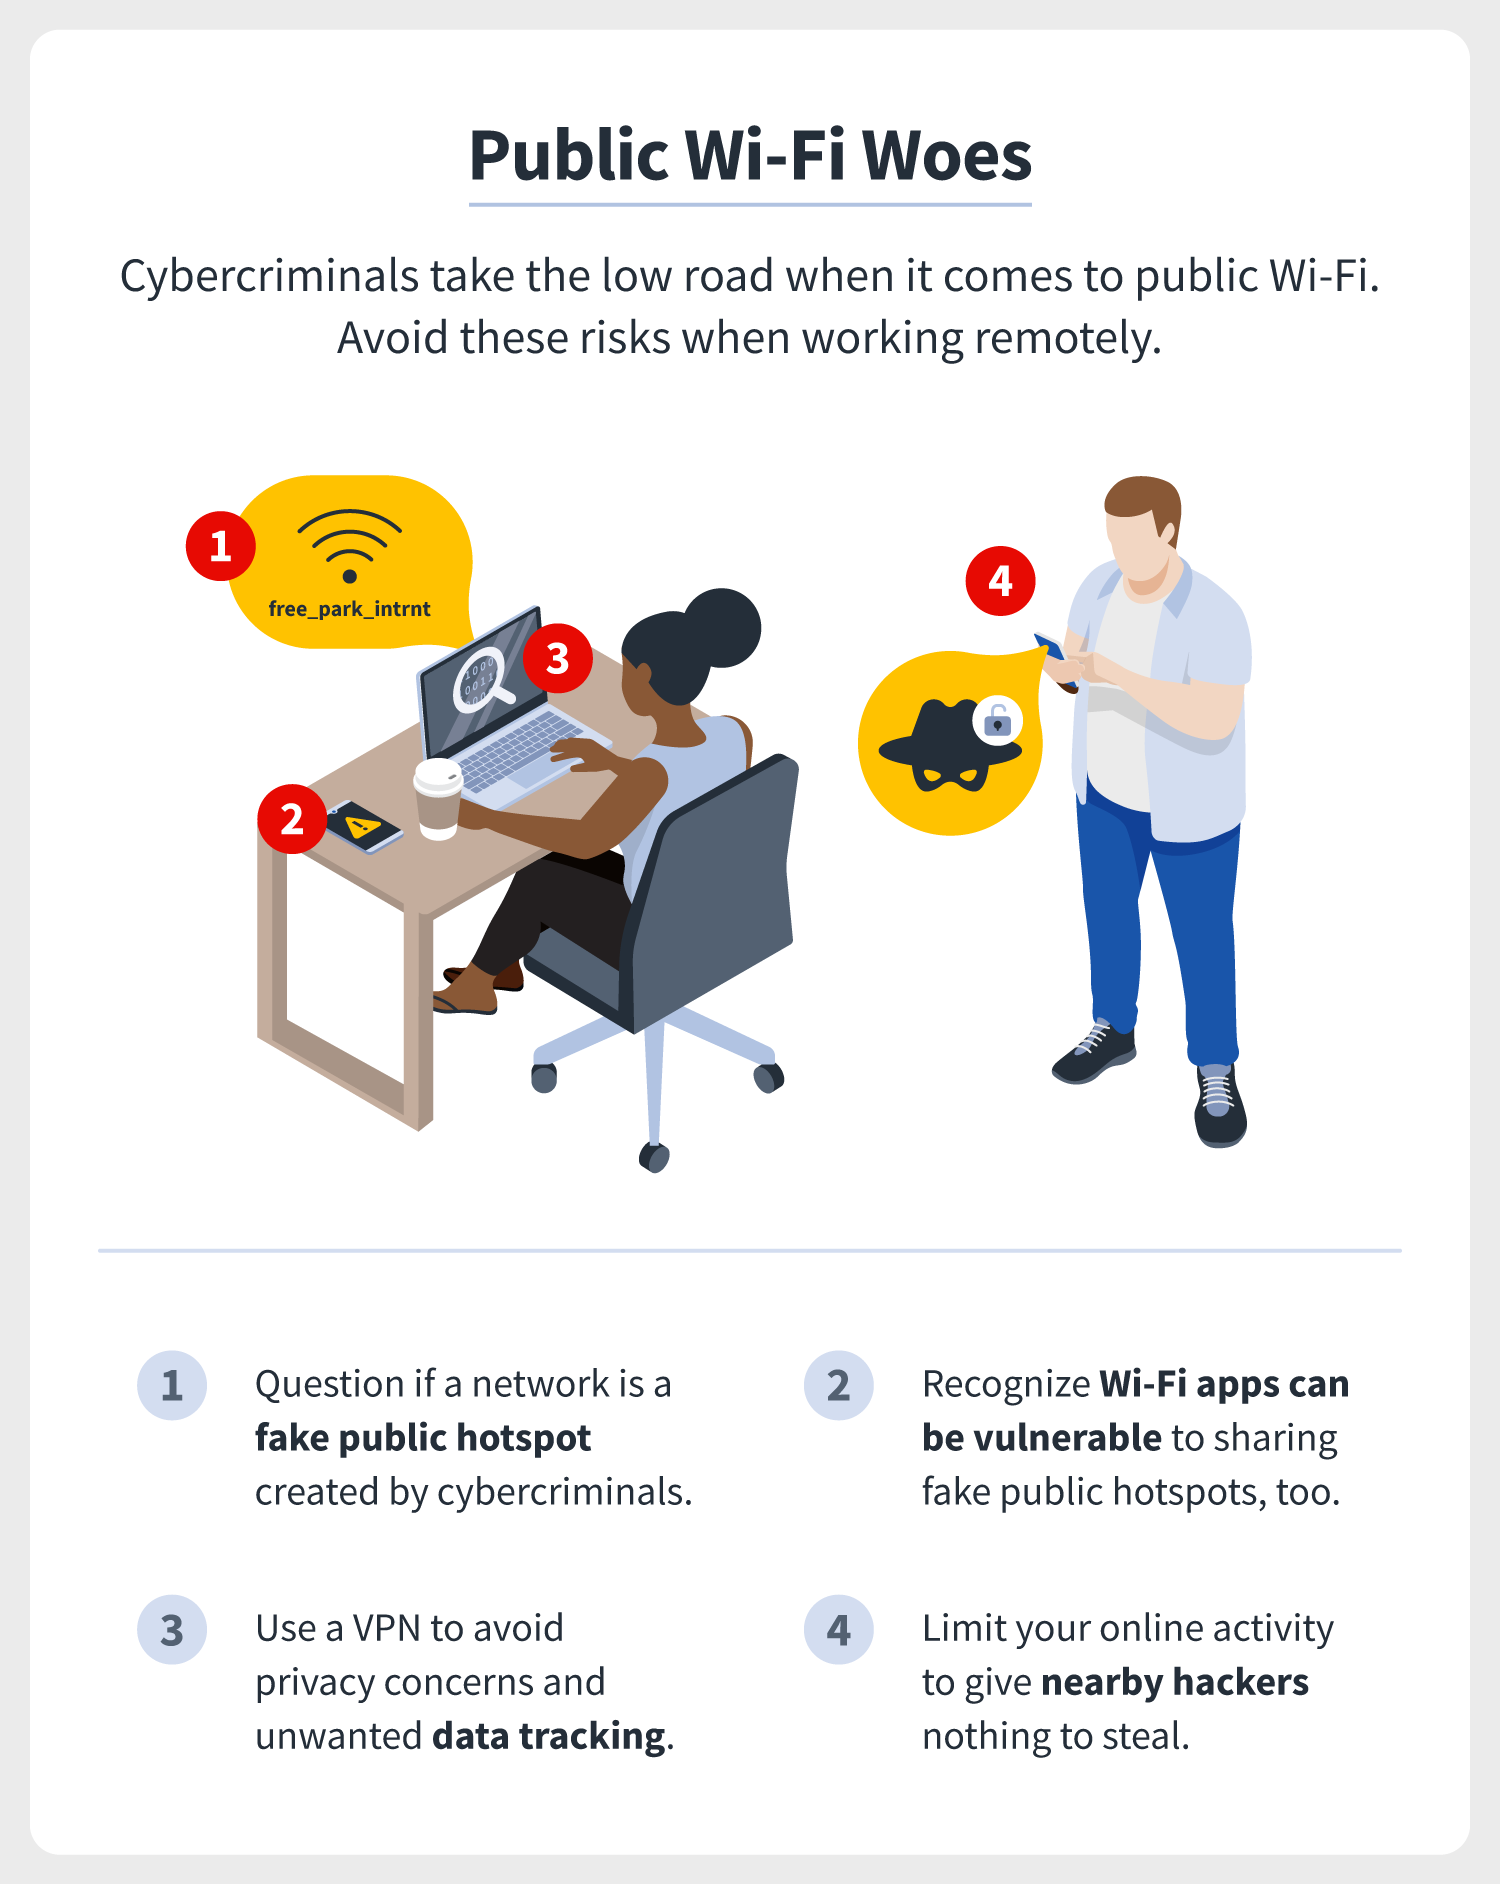 An overview of public Wi-Fi woes and risks when it comes to cybersecurity.